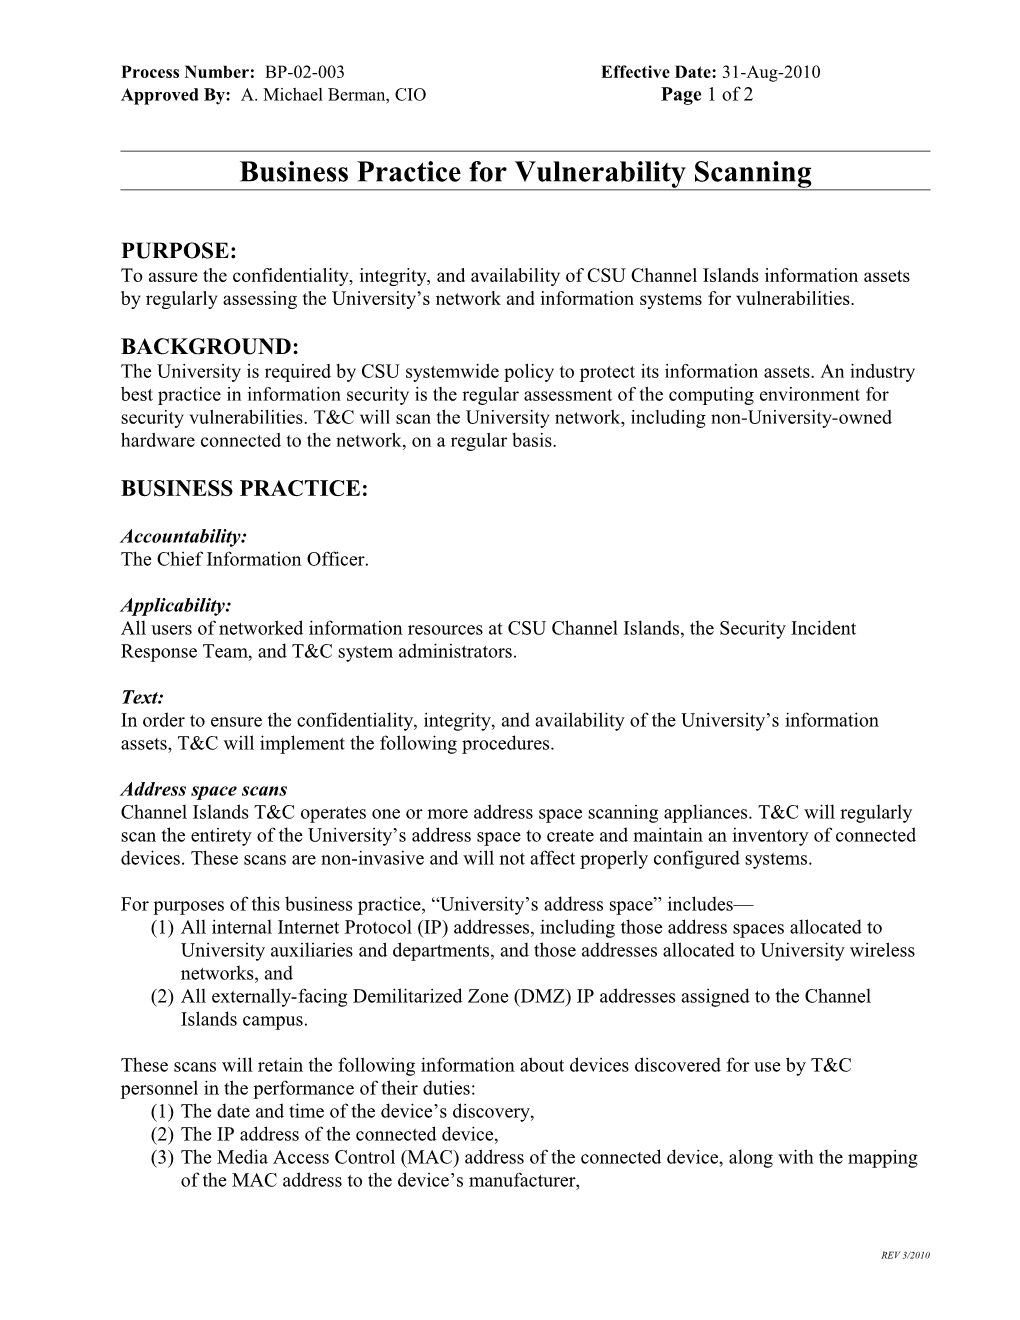 Business Practice for Vulnerability Scanning